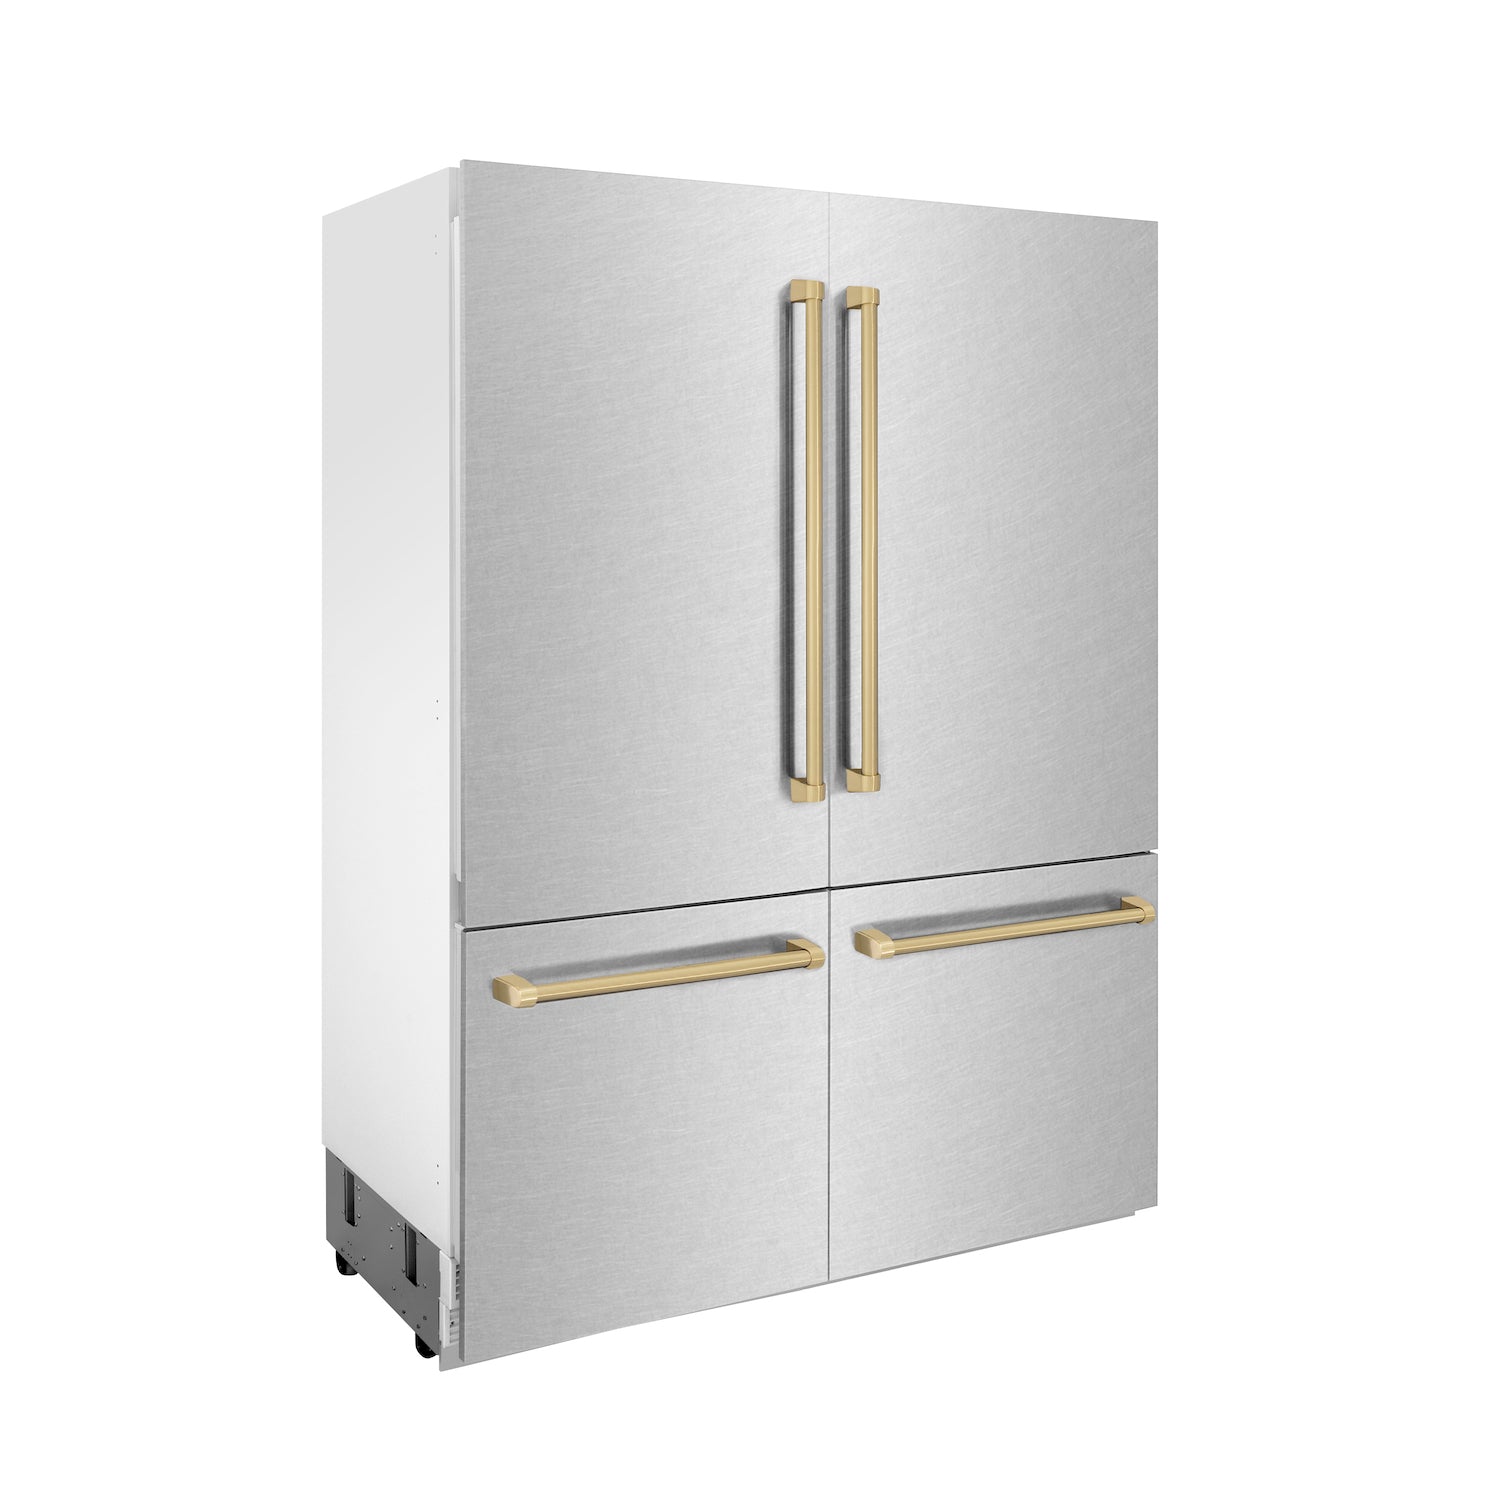 ZLINE Autograph Edition 60 in. 32.2 cu. ft. Built-in 4-Door French Door Refrigerator with Internal Water and Ice Dispenser in Fingerprint Resistant Stainless Steel with Champagne Bronze Accents (RBIVZ-SN-60-CB) side.